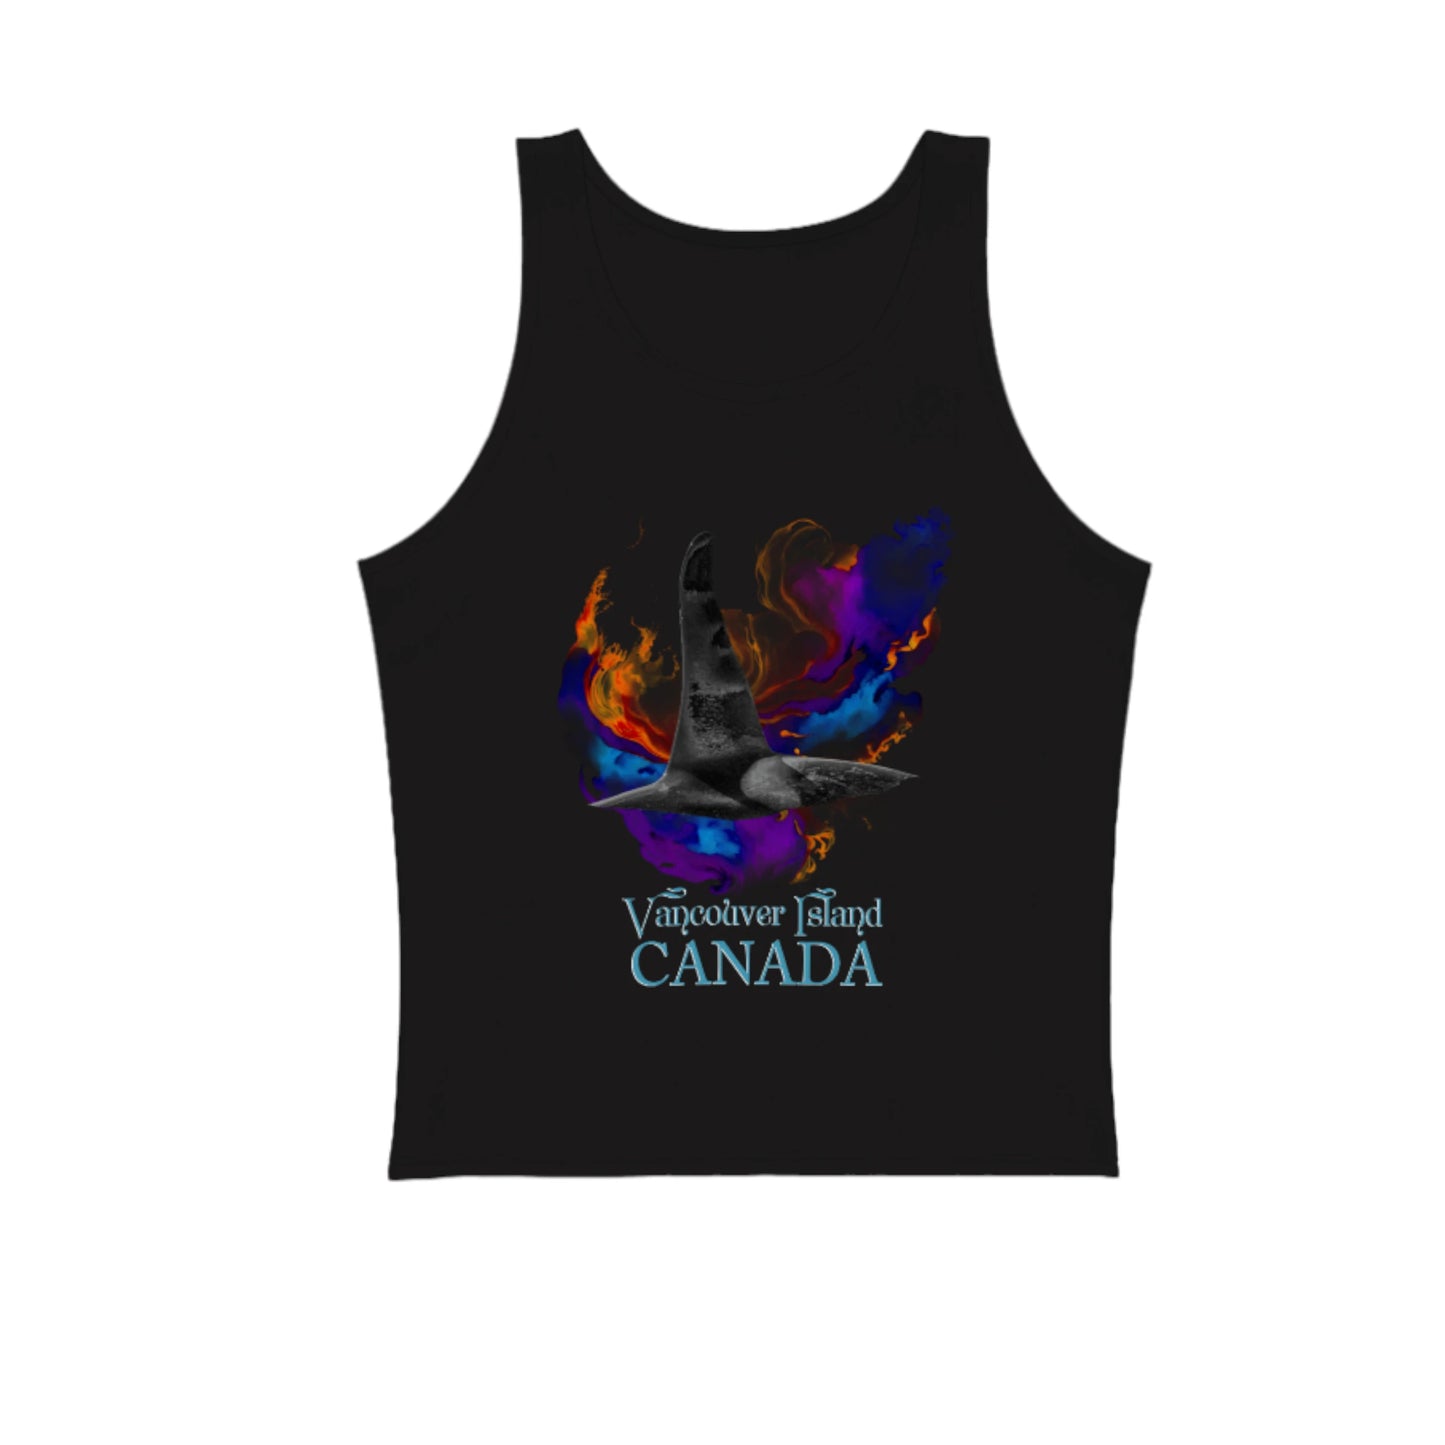 Orca Aura Vancouver Island Canada Premium Unisex Tank Top.  Souvenir of Vancouver Island. The image features an large male orca dorsal fin with an abstract aura of colours! by van isle goddess dot com